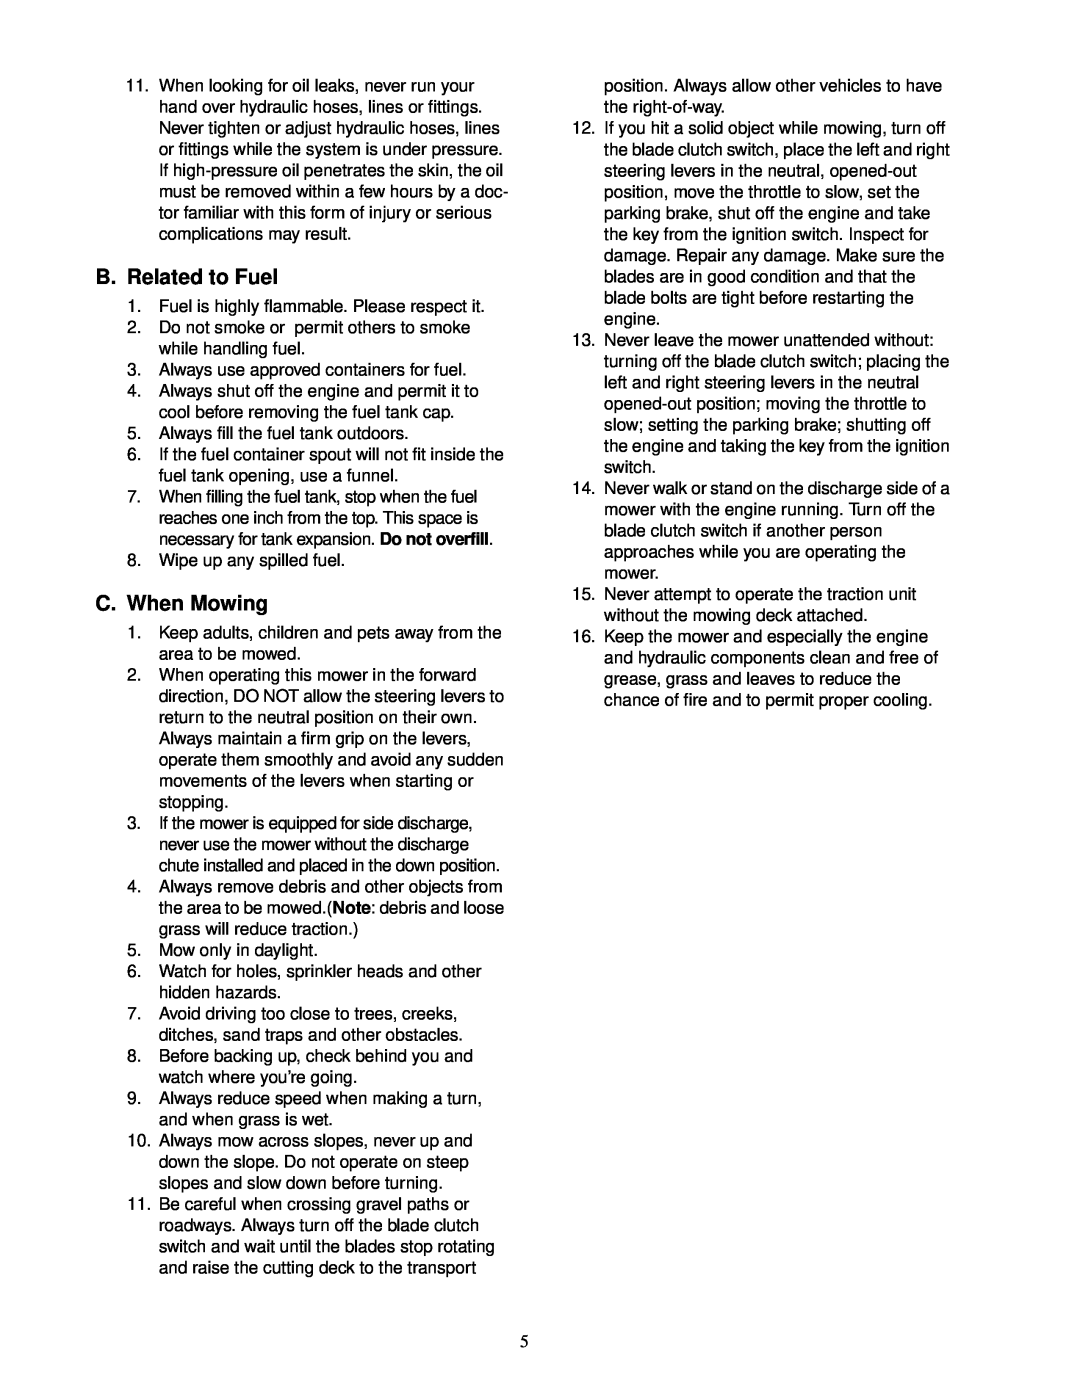 Cub Cadet 18HP service manual B.Related to Fuel, C.When Mowing 